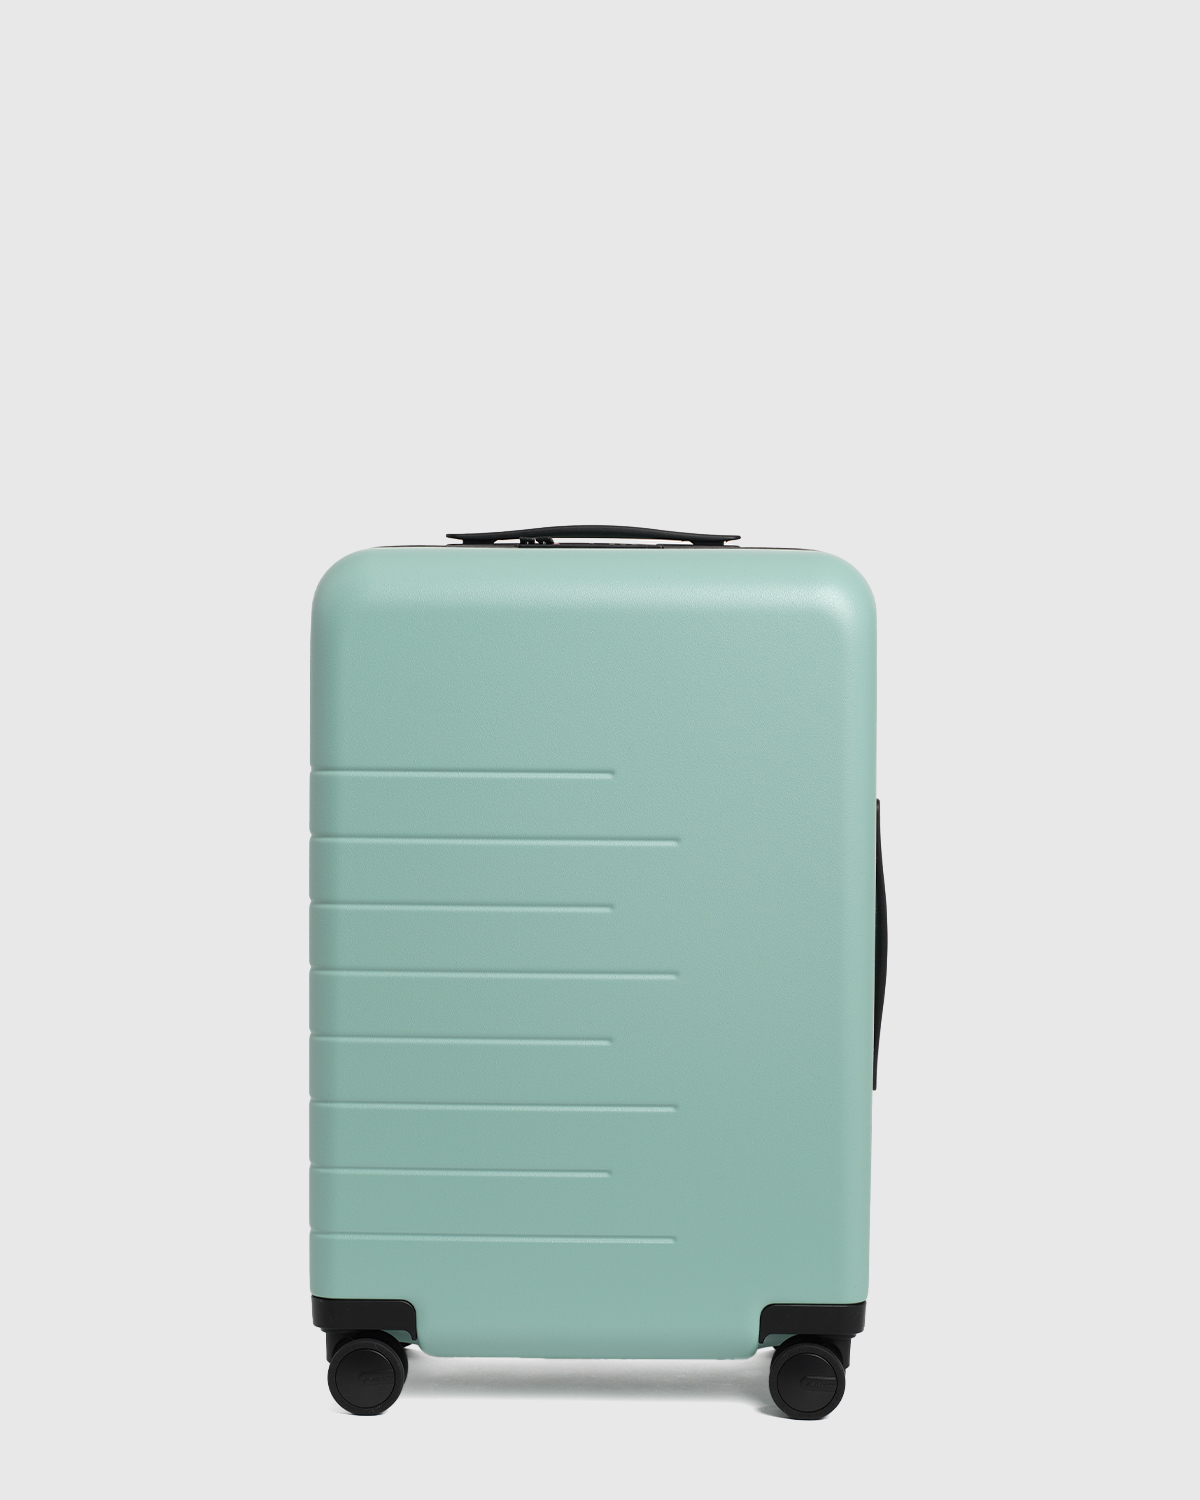 Quince Carry-on Hard Shell Suitcase 21" In Seaglass